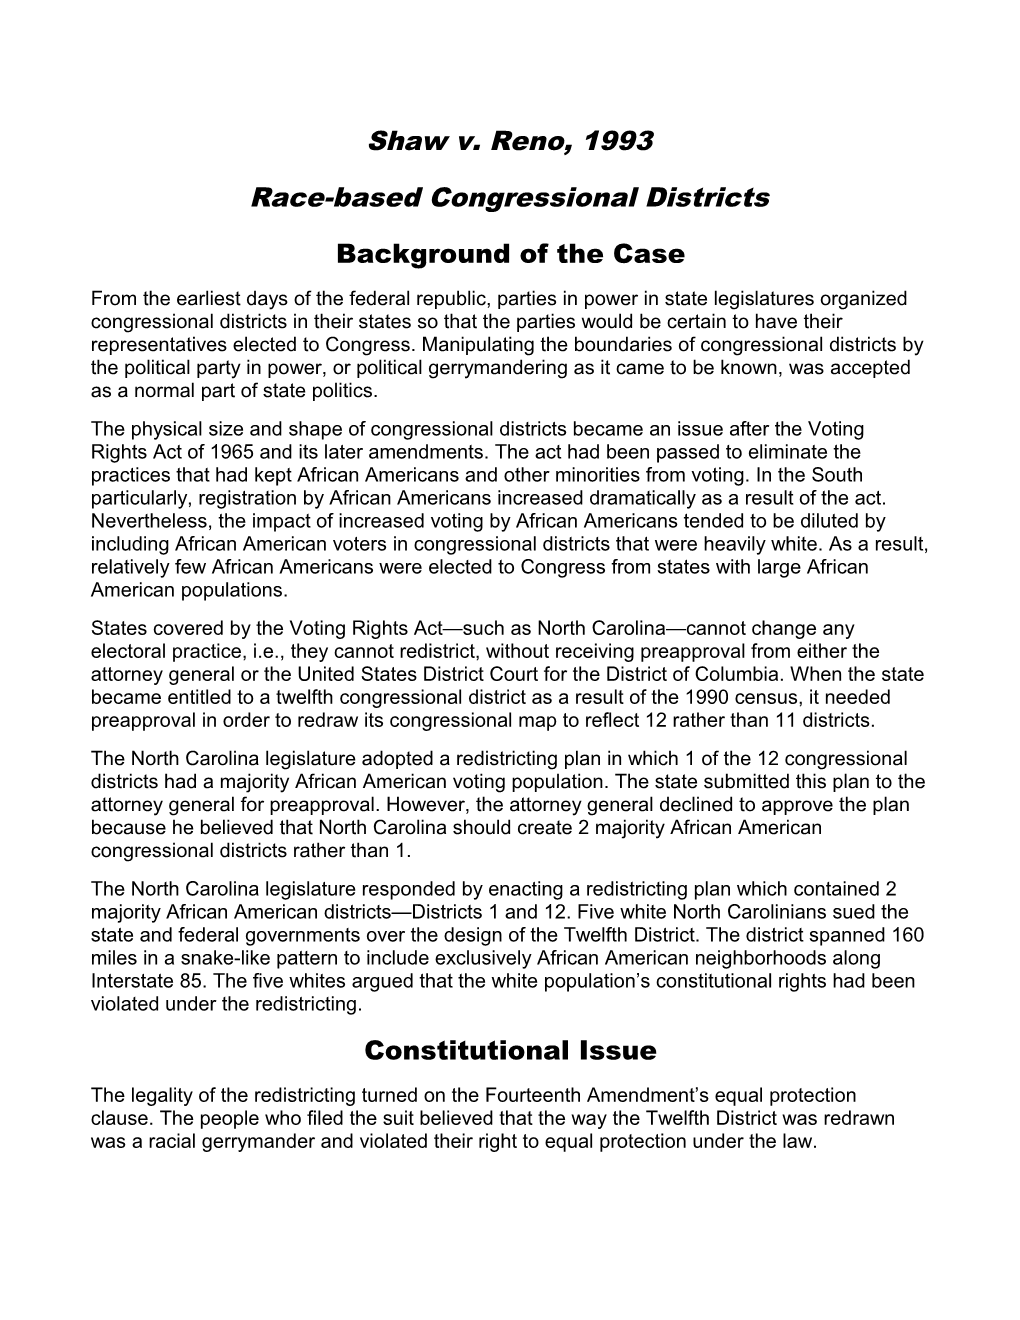 Race-Based Congressional Districts